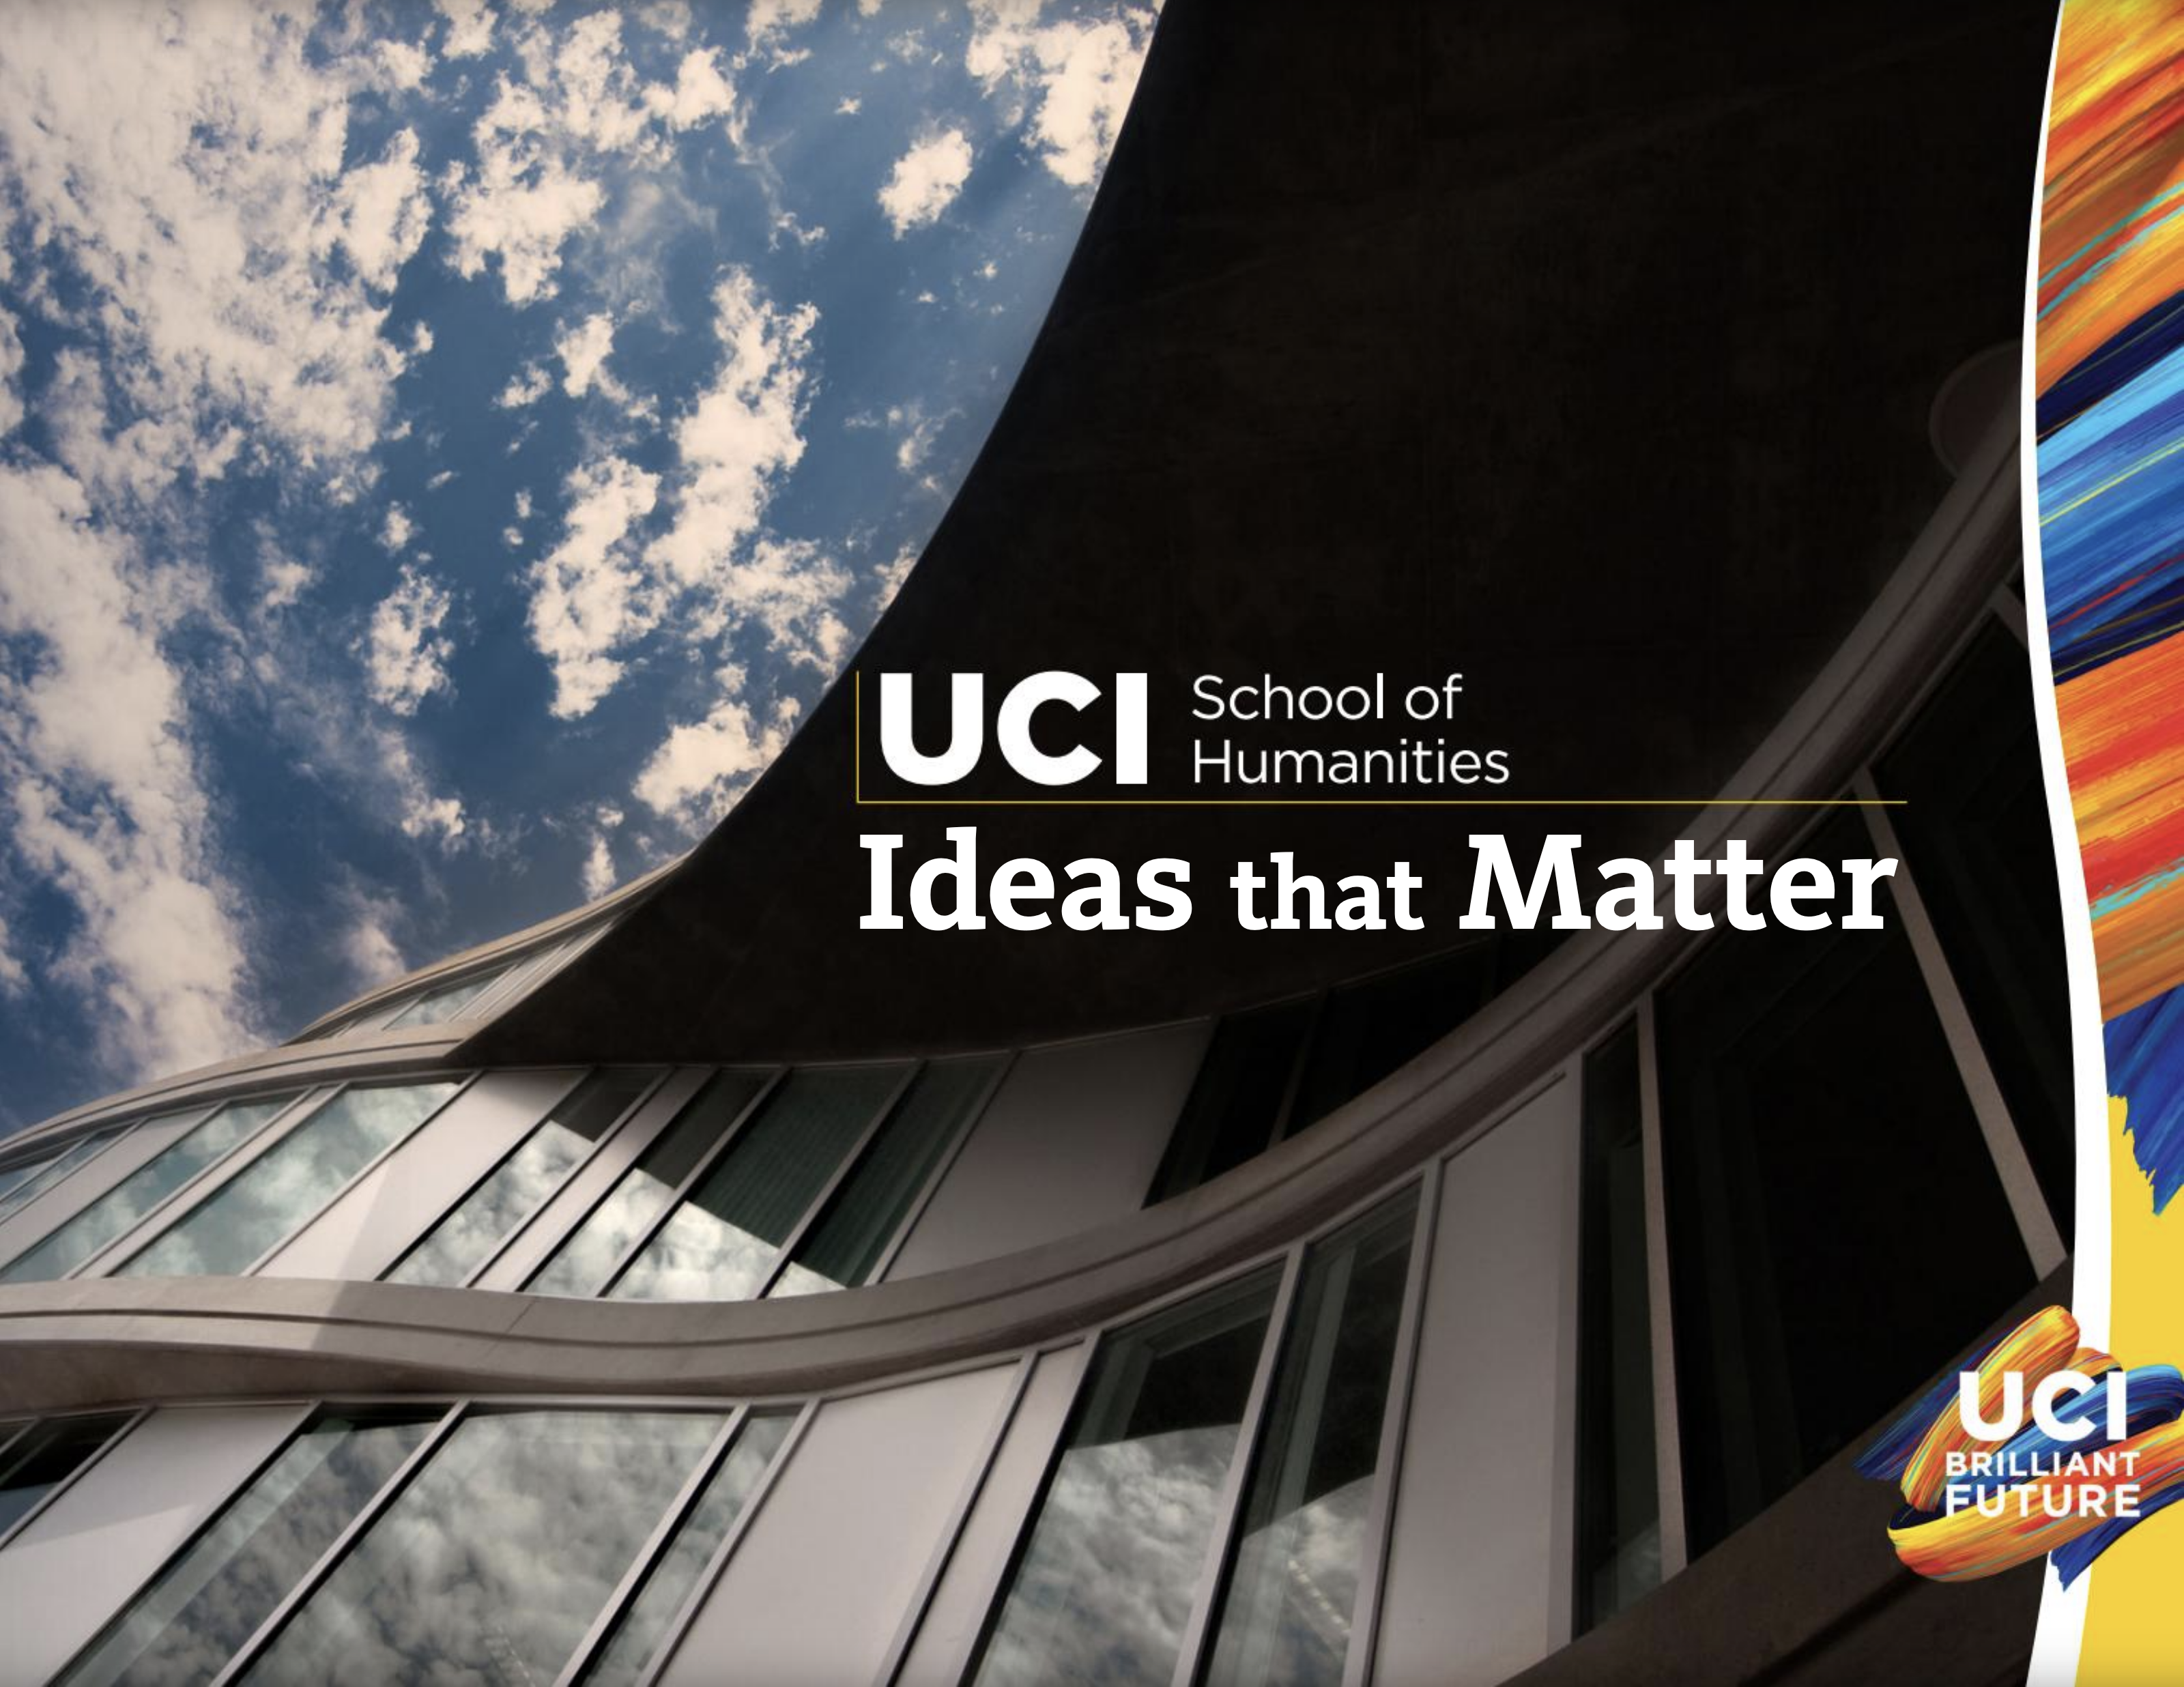 An image of Humanities Gateway from below with the words UCI School of Humanities and Ideas that Matter